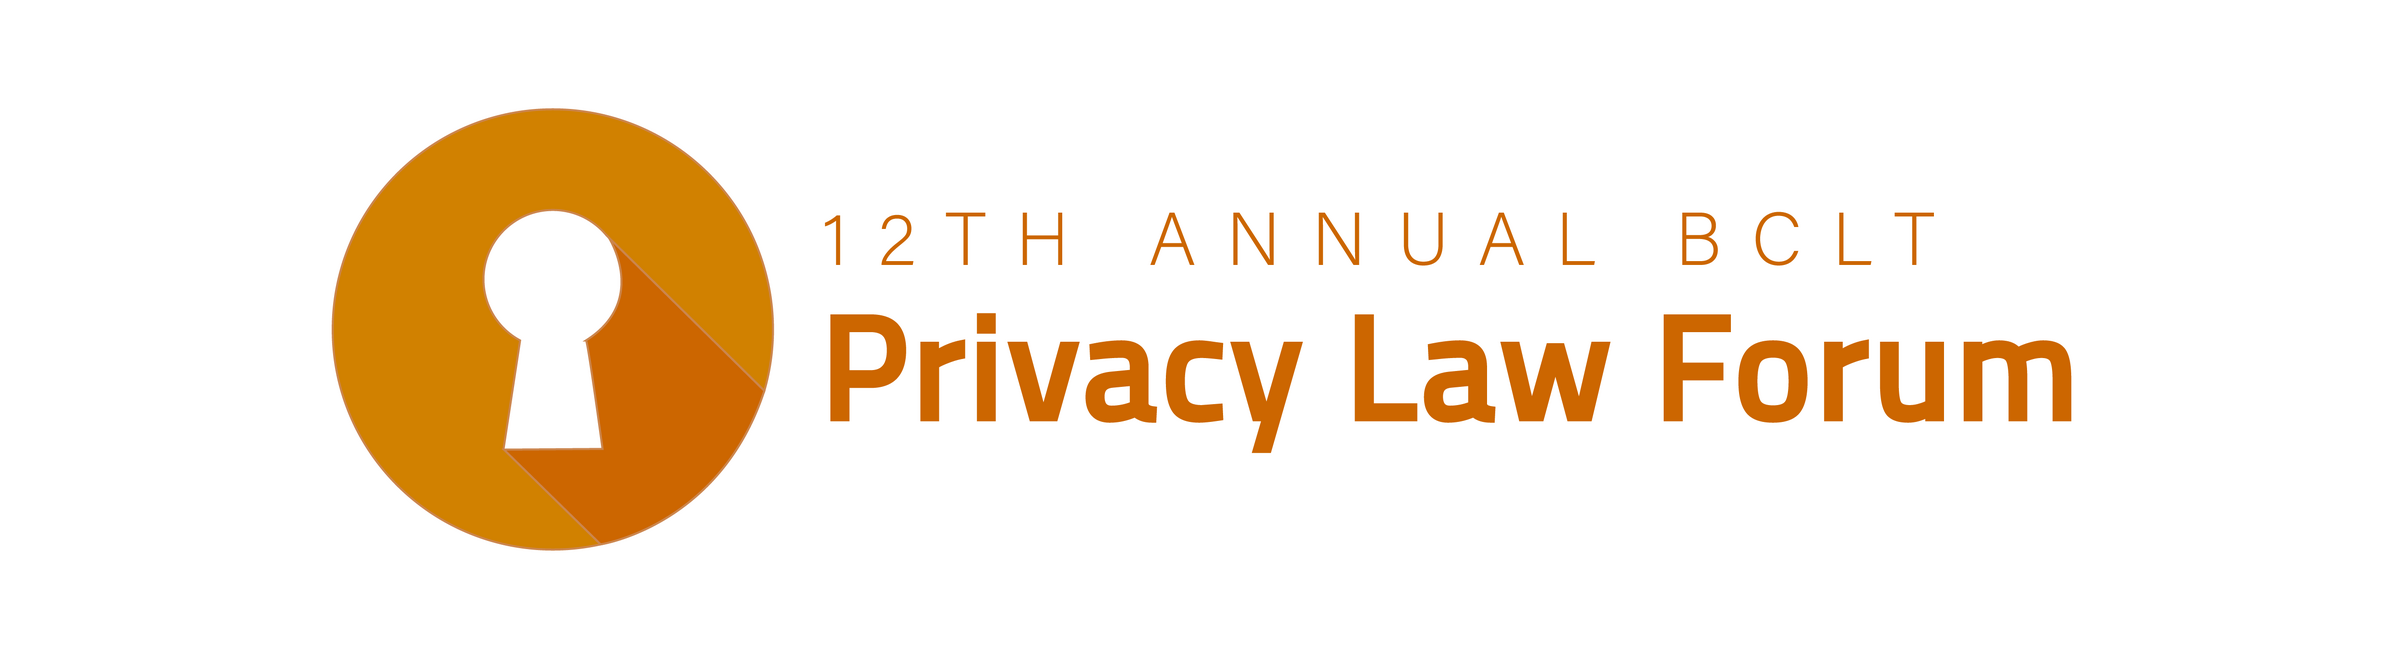 12th Annual BCLT Privacy Law Forum